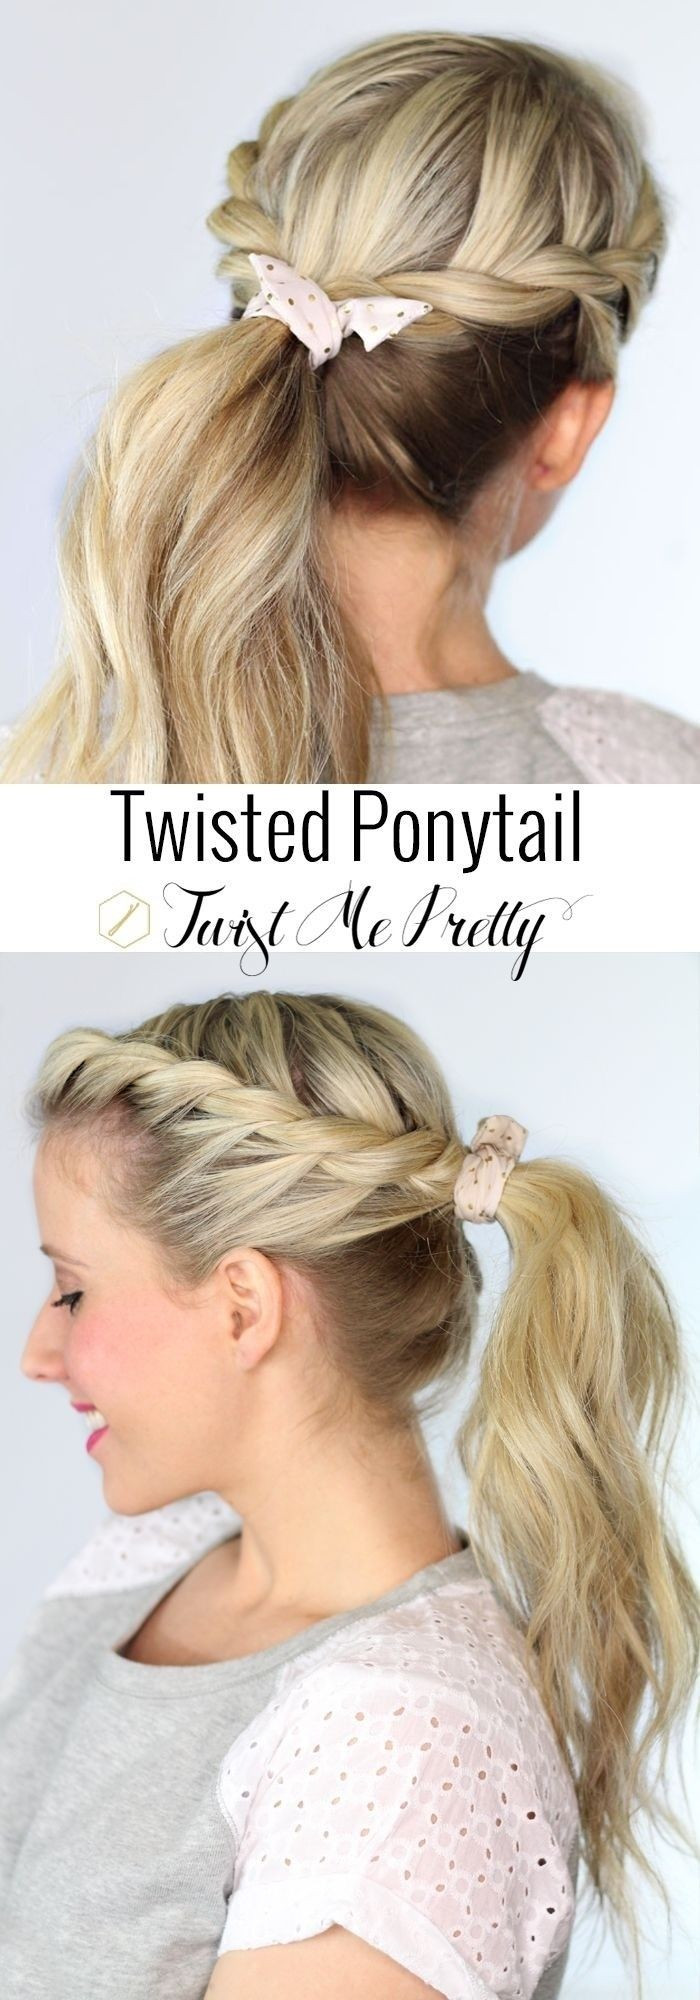 Cute Hairstyle Ideas
 20 Ponytail Hairstyles Discover Latest Ponytail Ideas Now